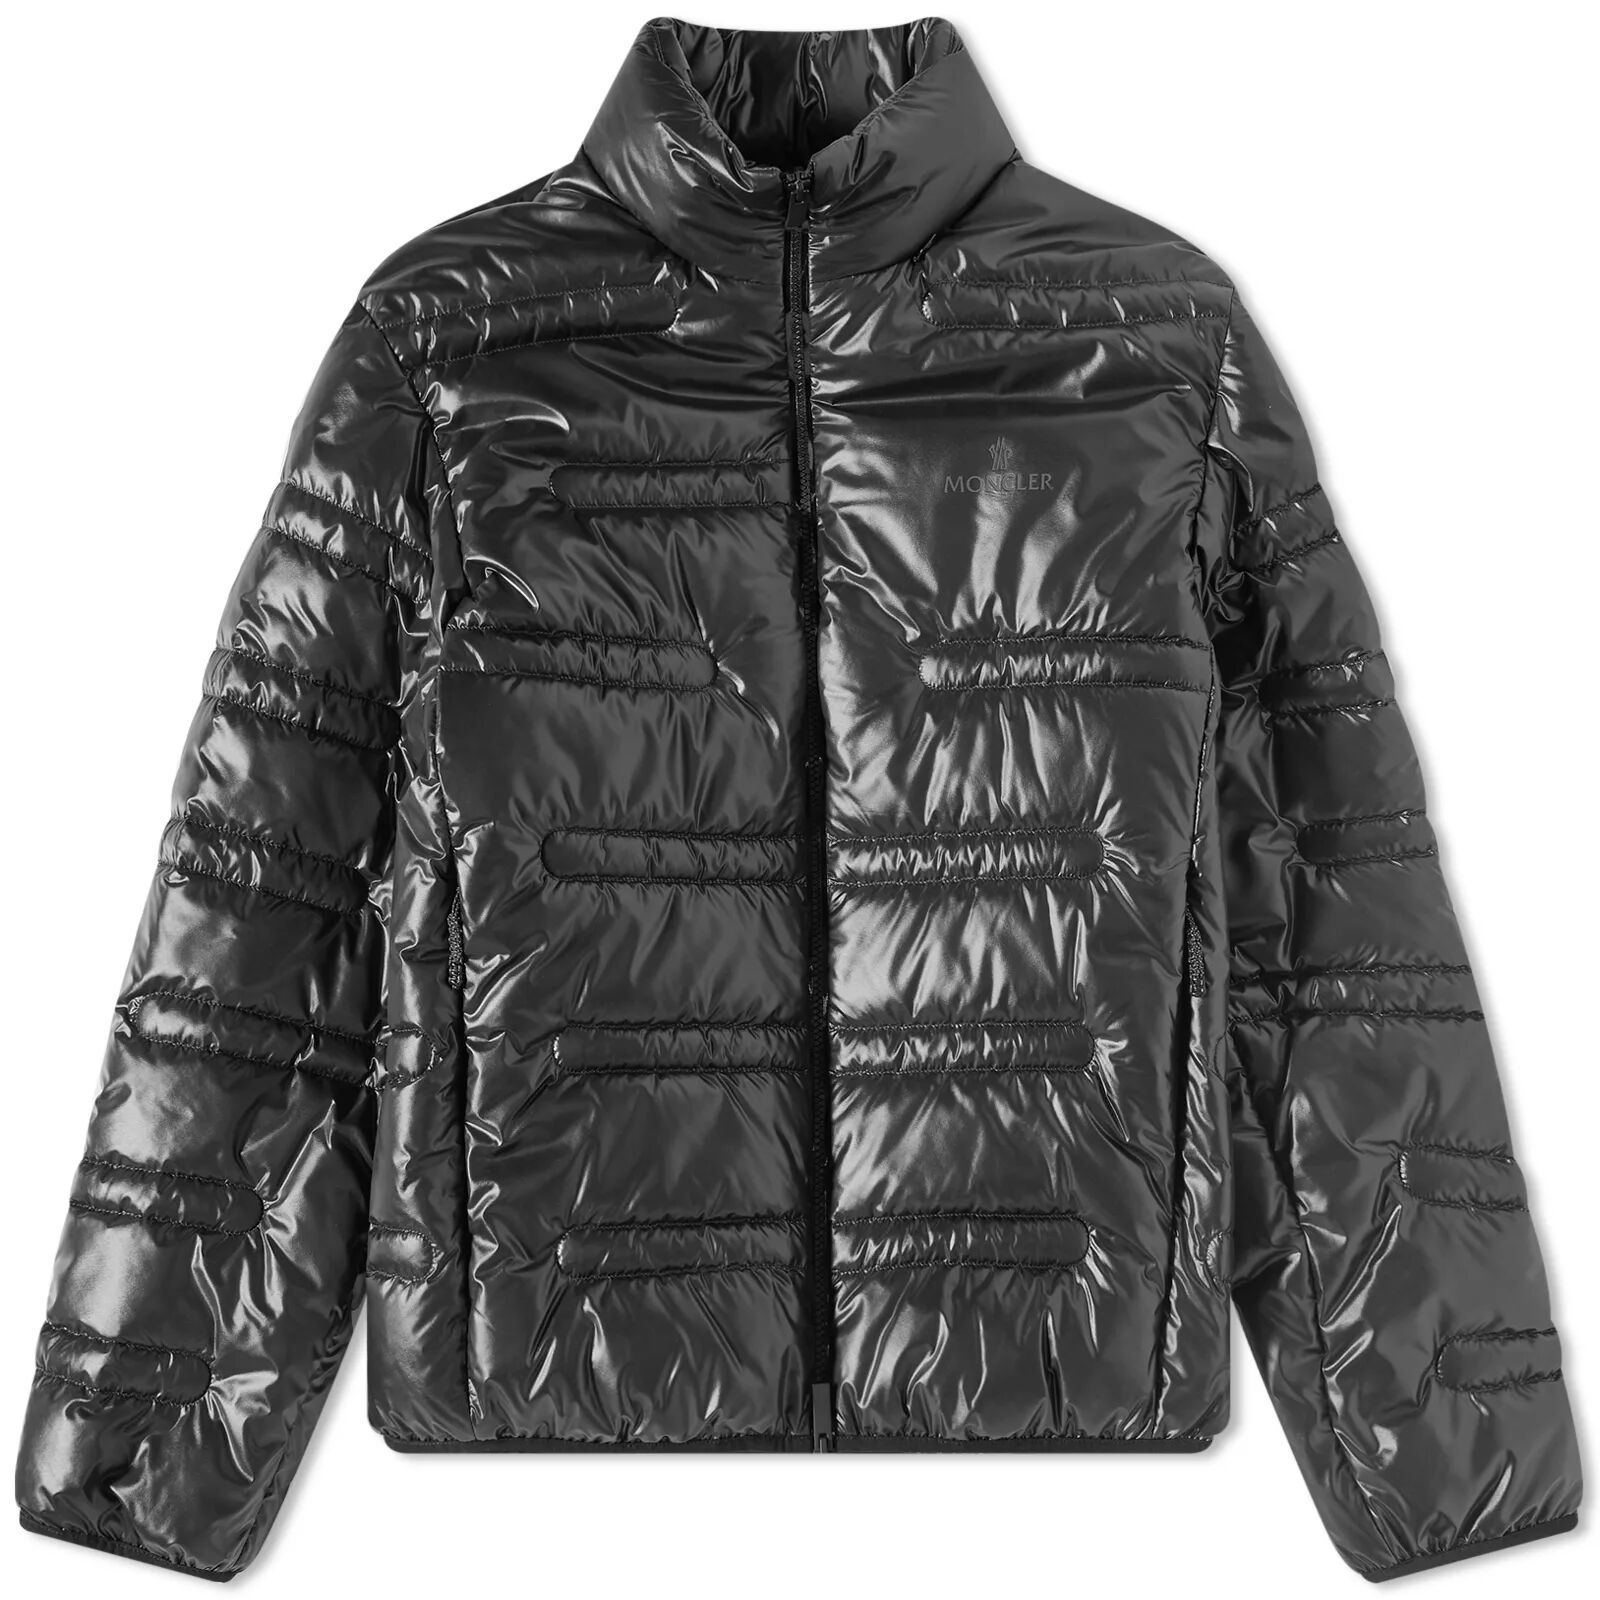 Moncler Men's Lot Down Jacket in Black, Size Small